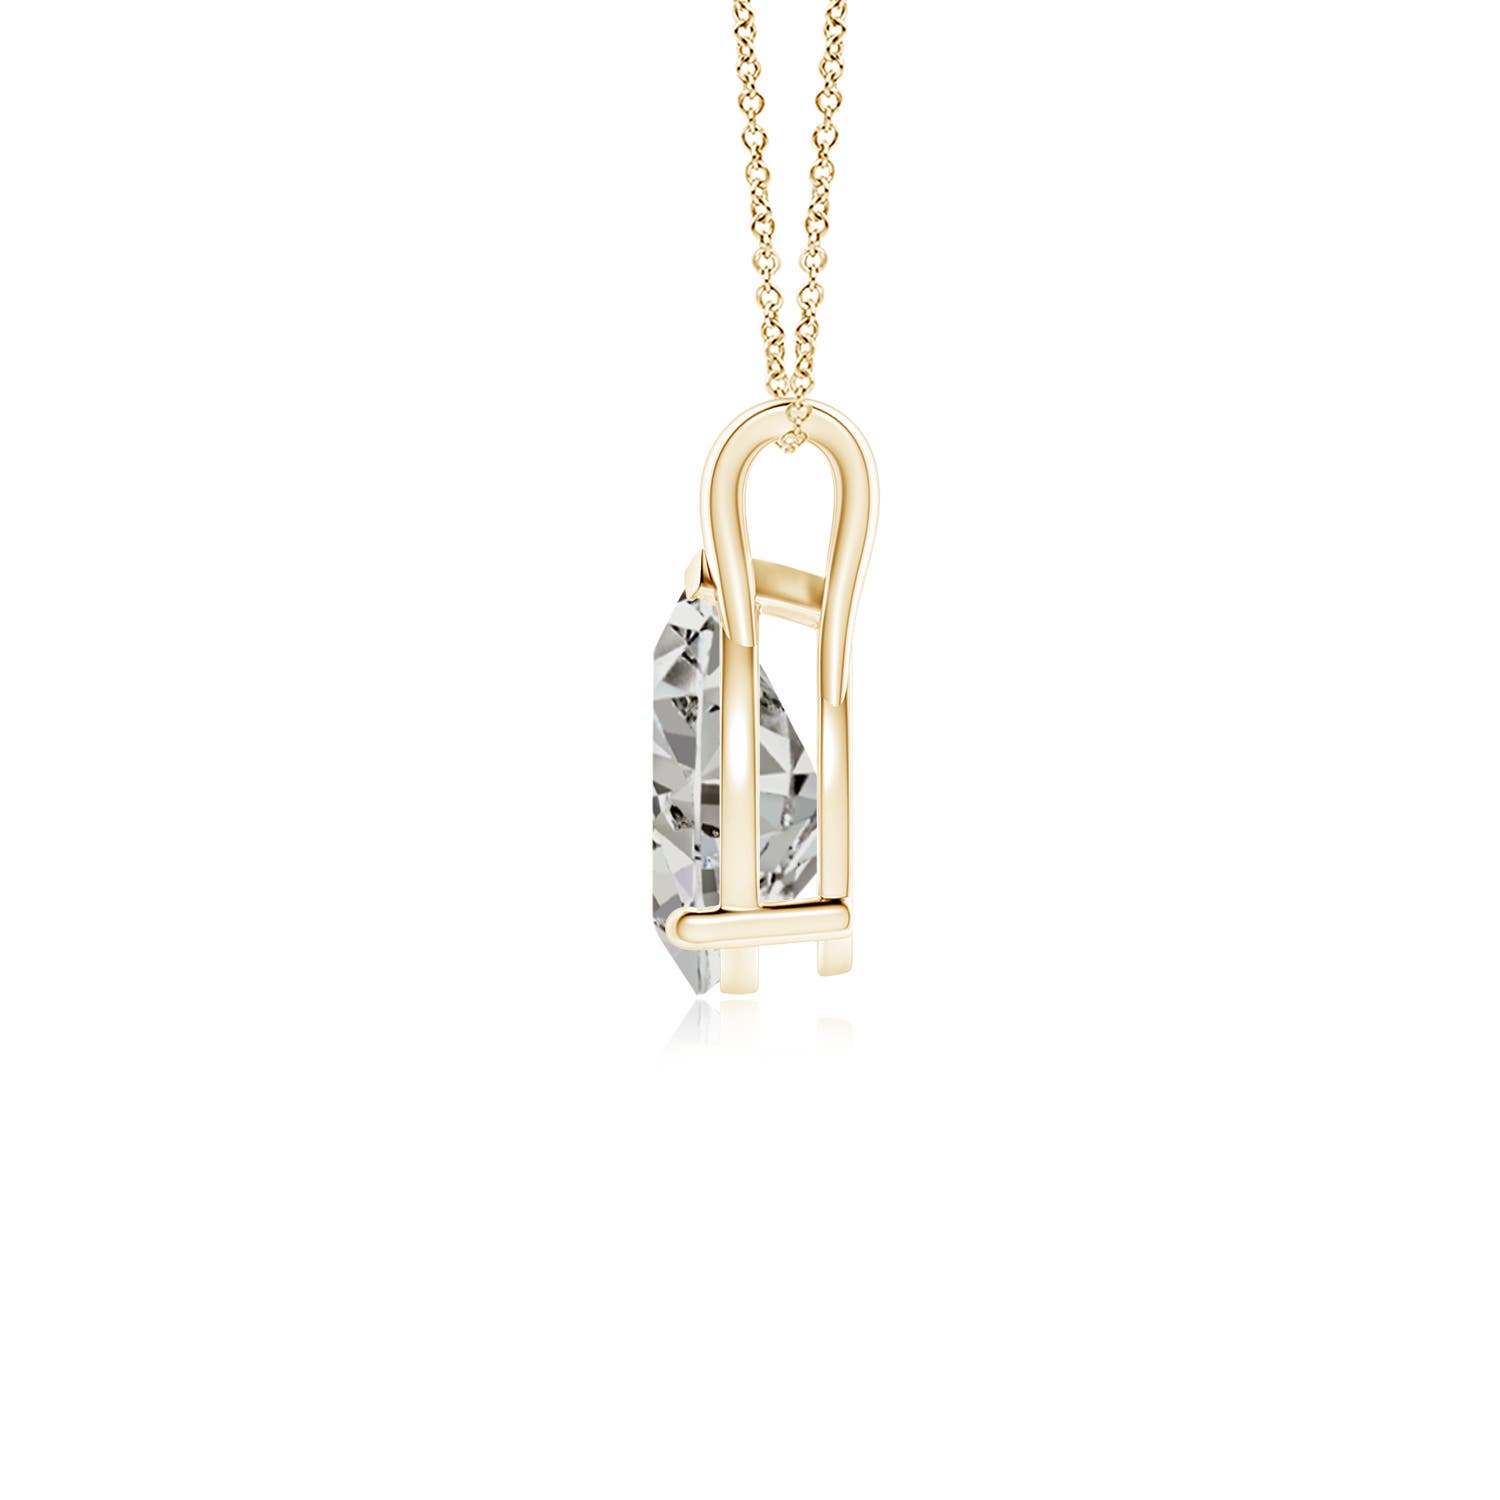 K, I3 / 1 CT / 14 KT Yellow Gold